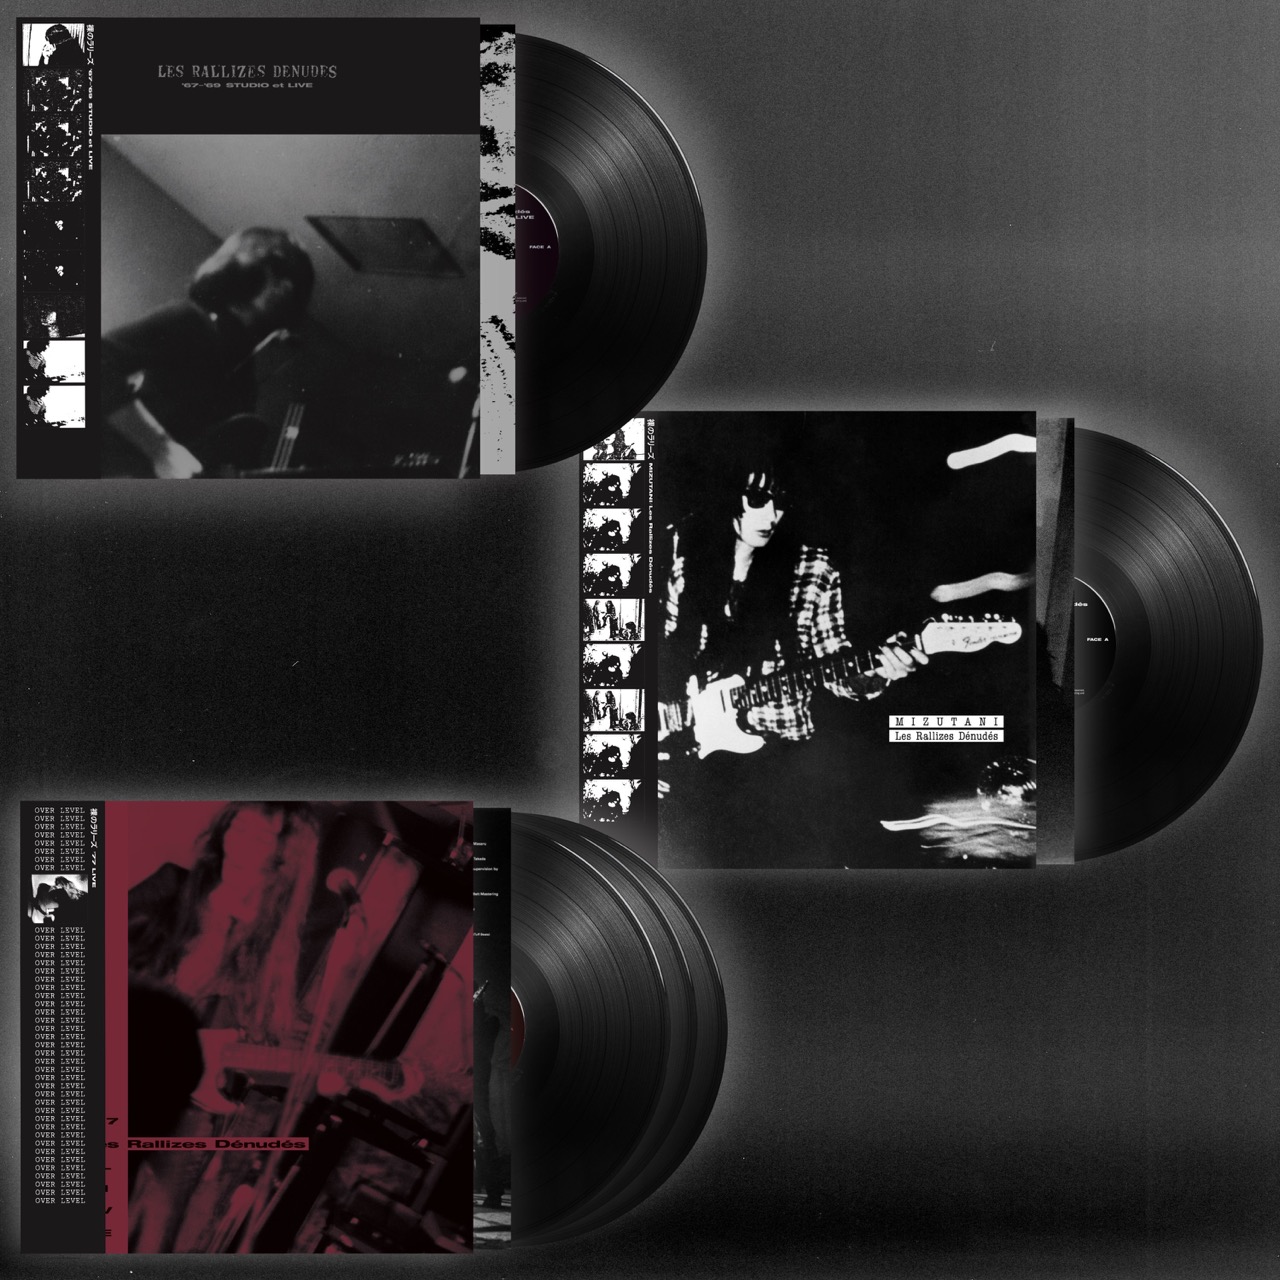 Upcoming vinyl reissues of three albums by Les Rallizes Denudes